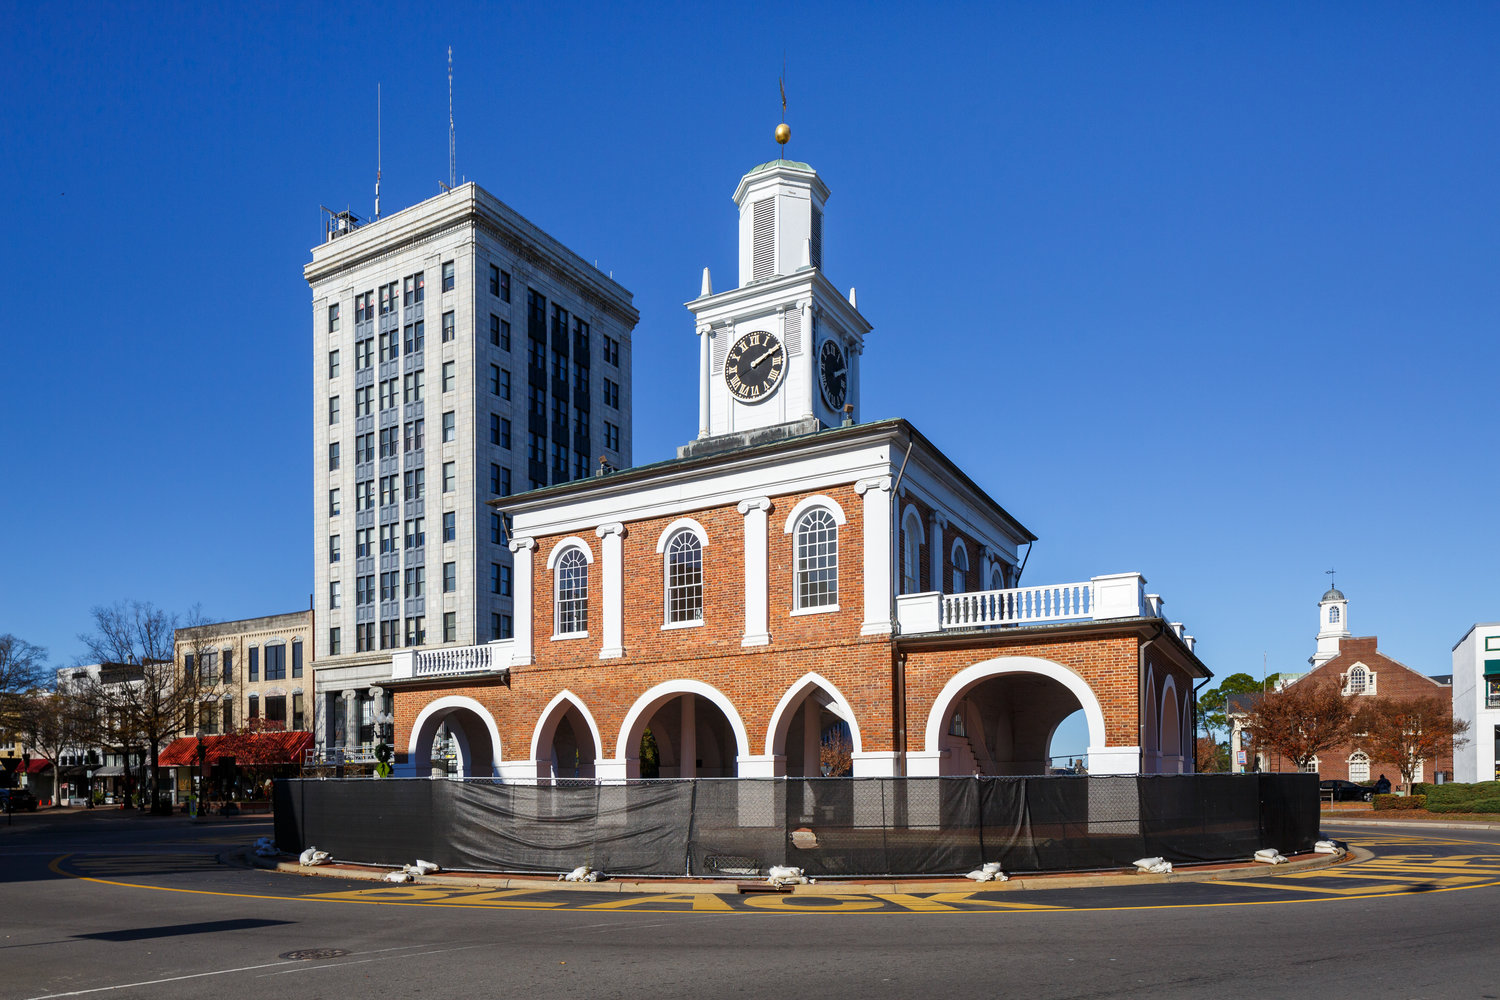 The City Council is waiting on a report from a Department of Justice program before making a recommendation on how to repurpose the Market House.